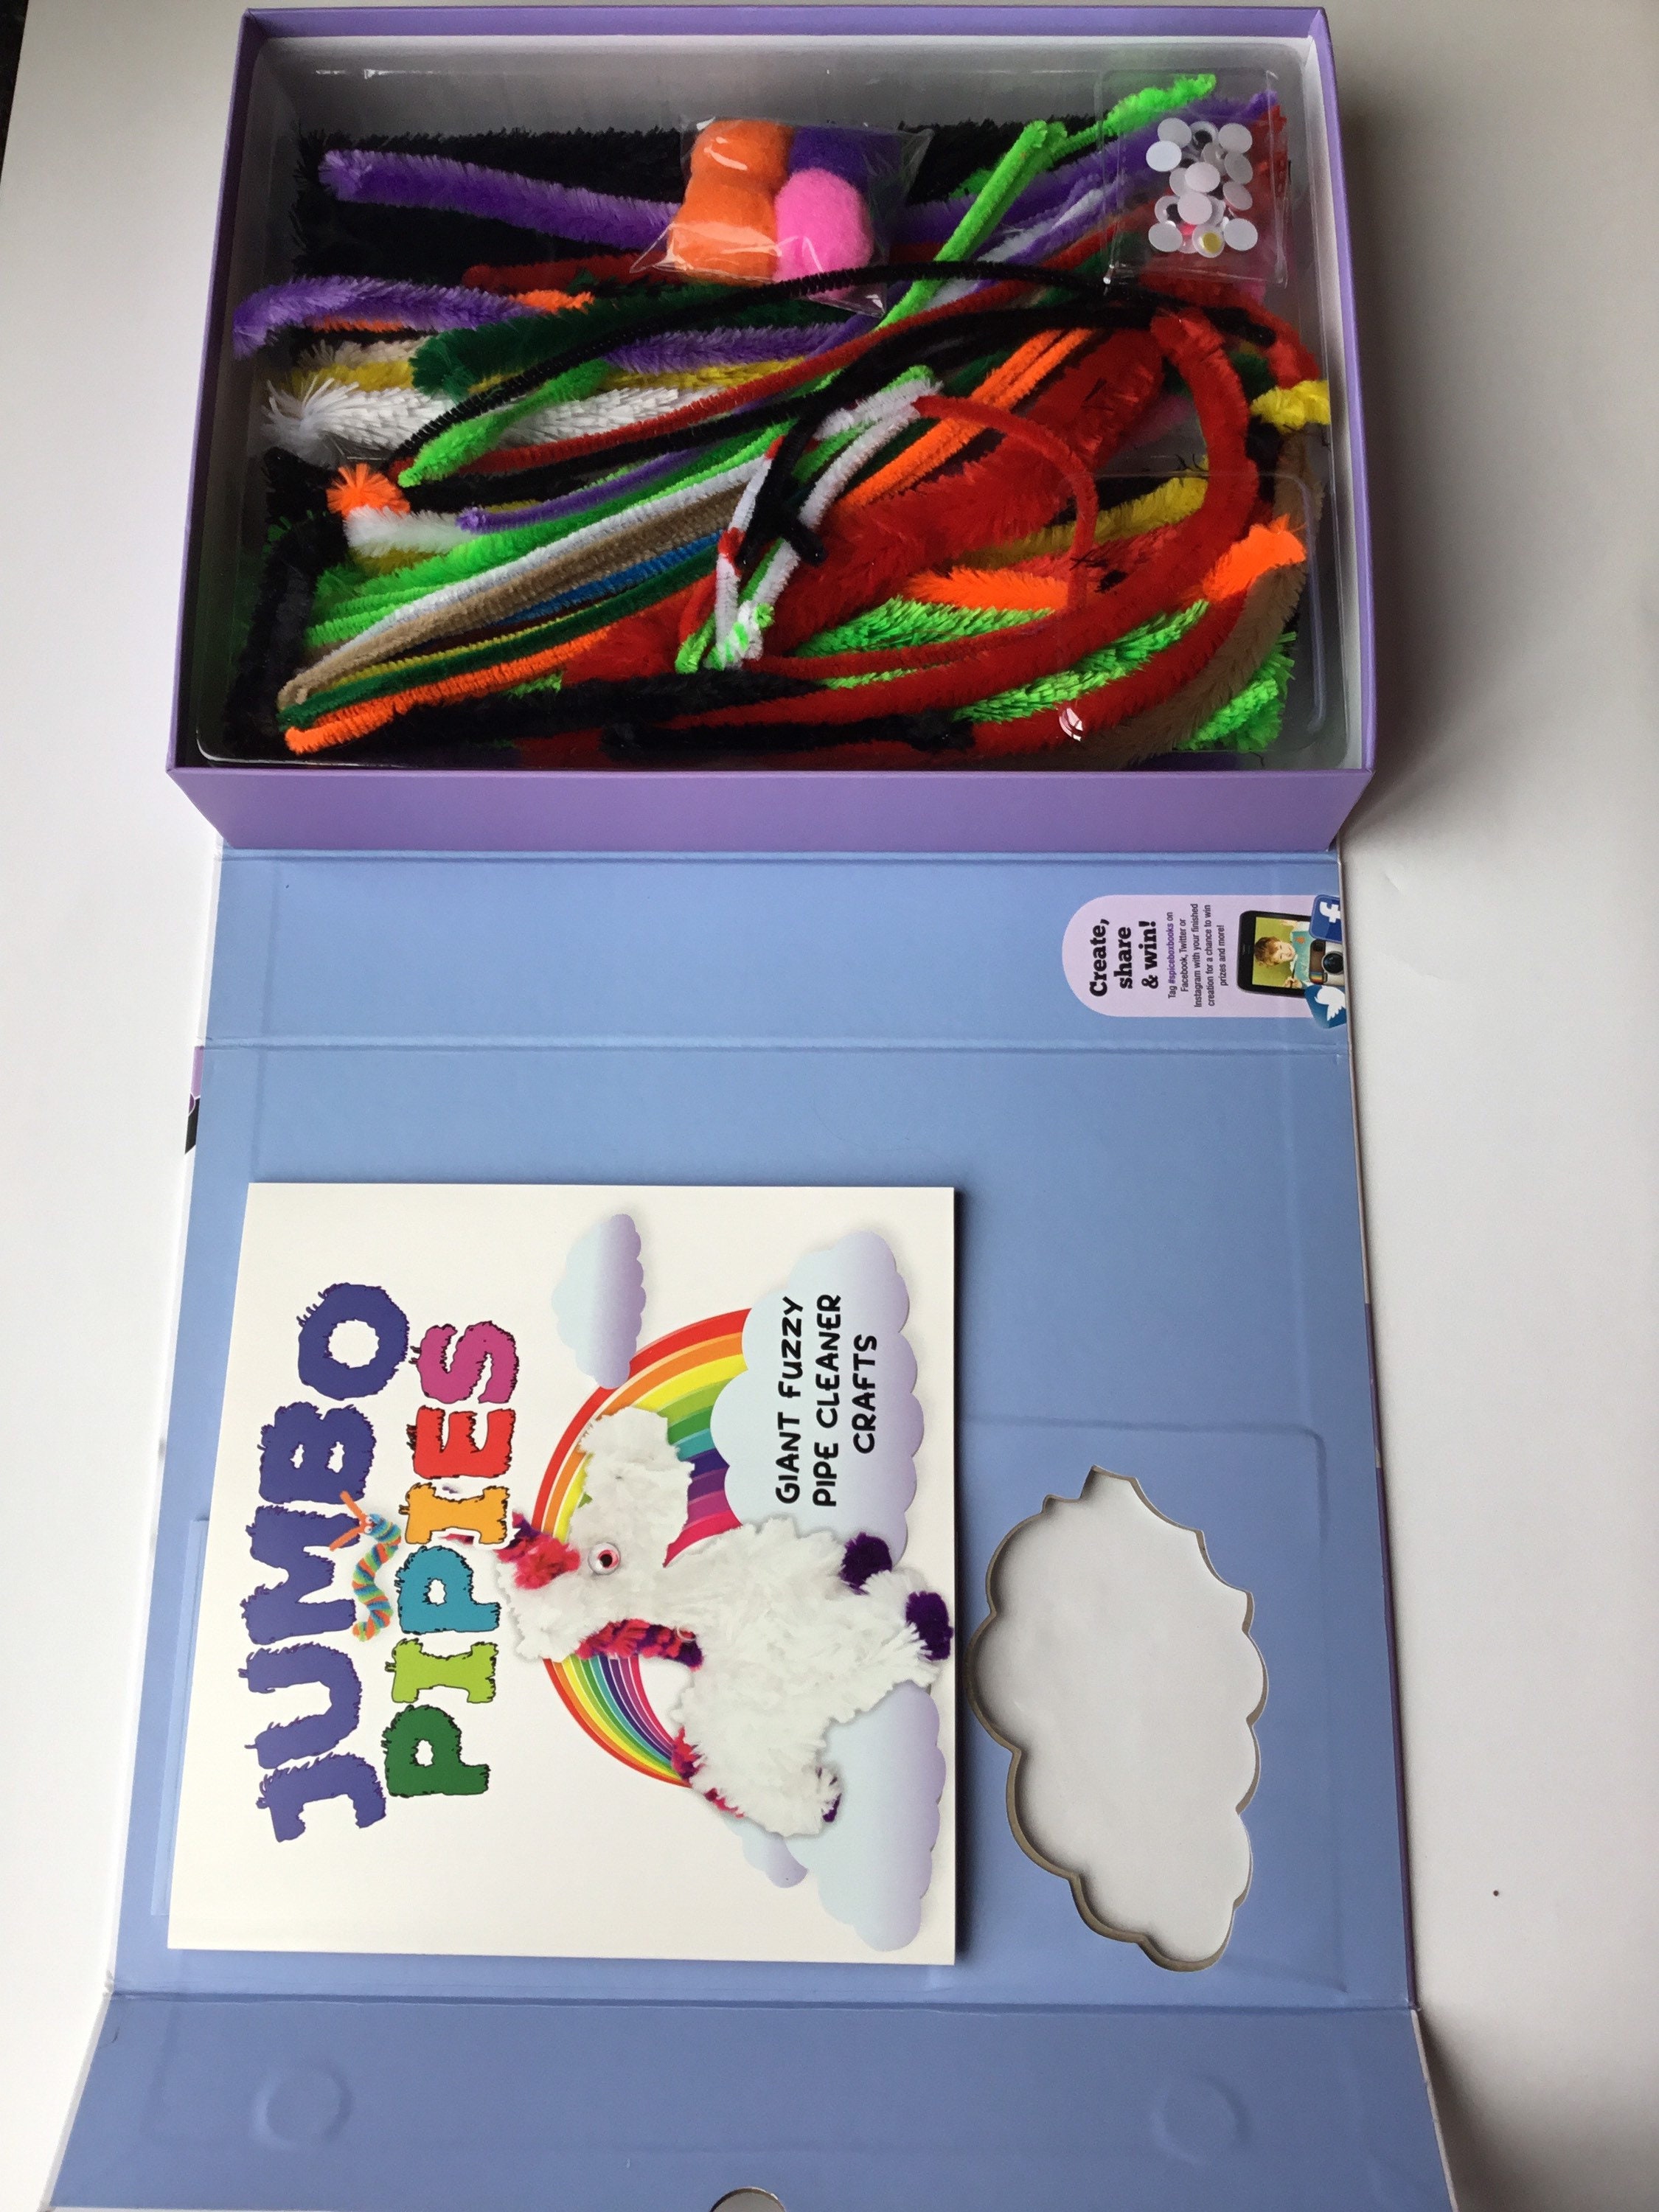 Spicebox Make & Play Jumbo Pipe Cleaner Crafts